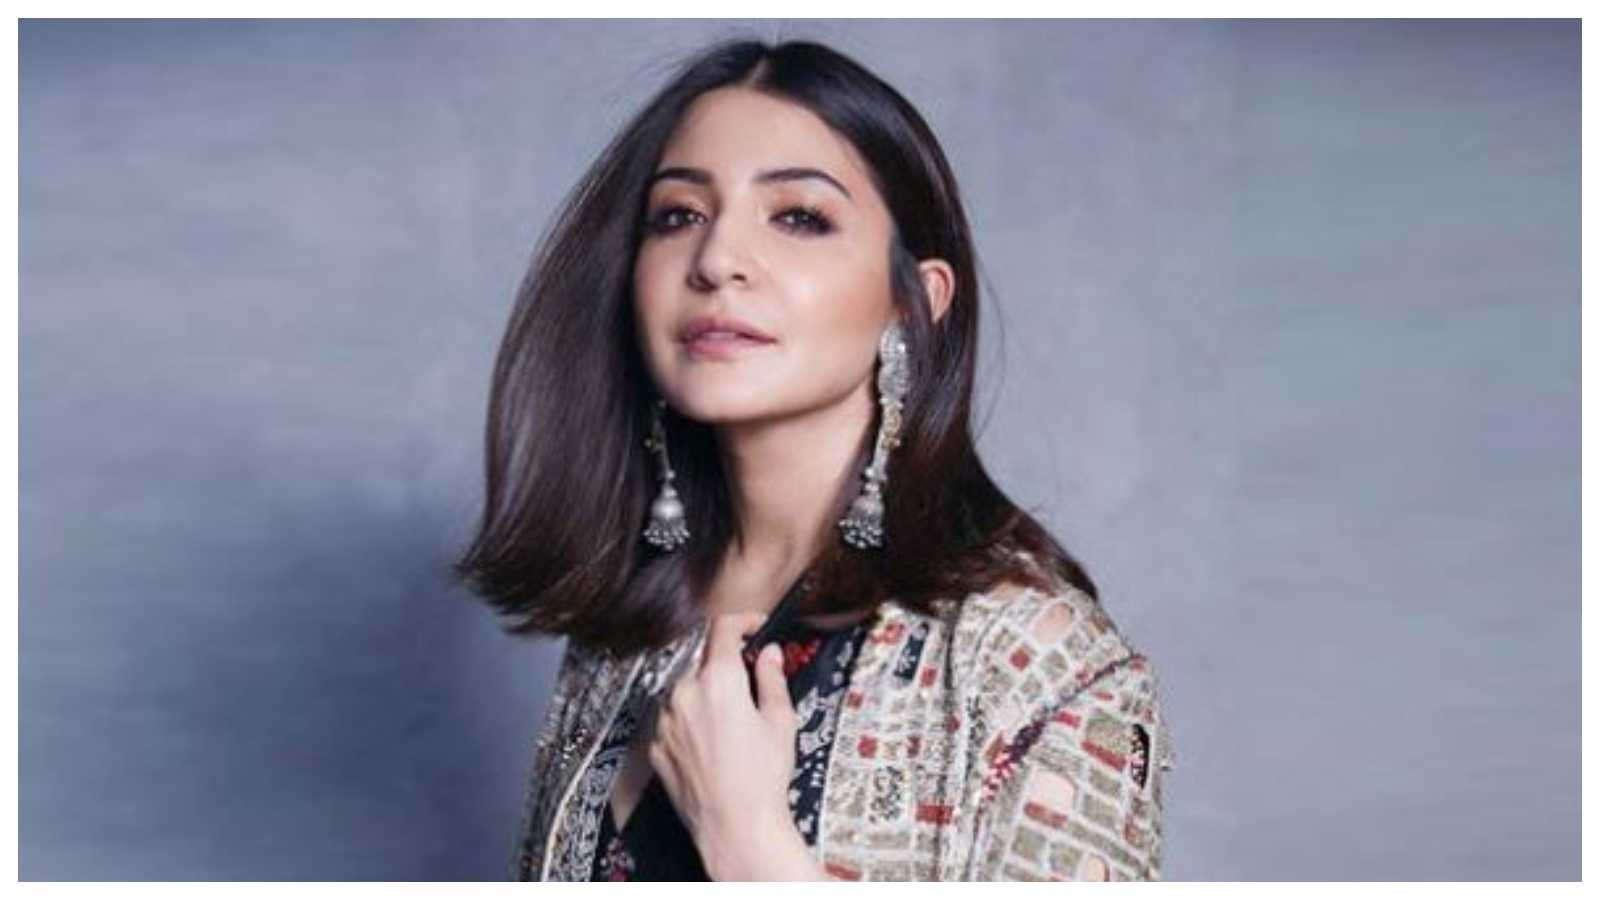 After Deepika Padukone, Anushka Sharma to make her Cannes 2023 red-carpet debut; will share stage with Kate Winslet